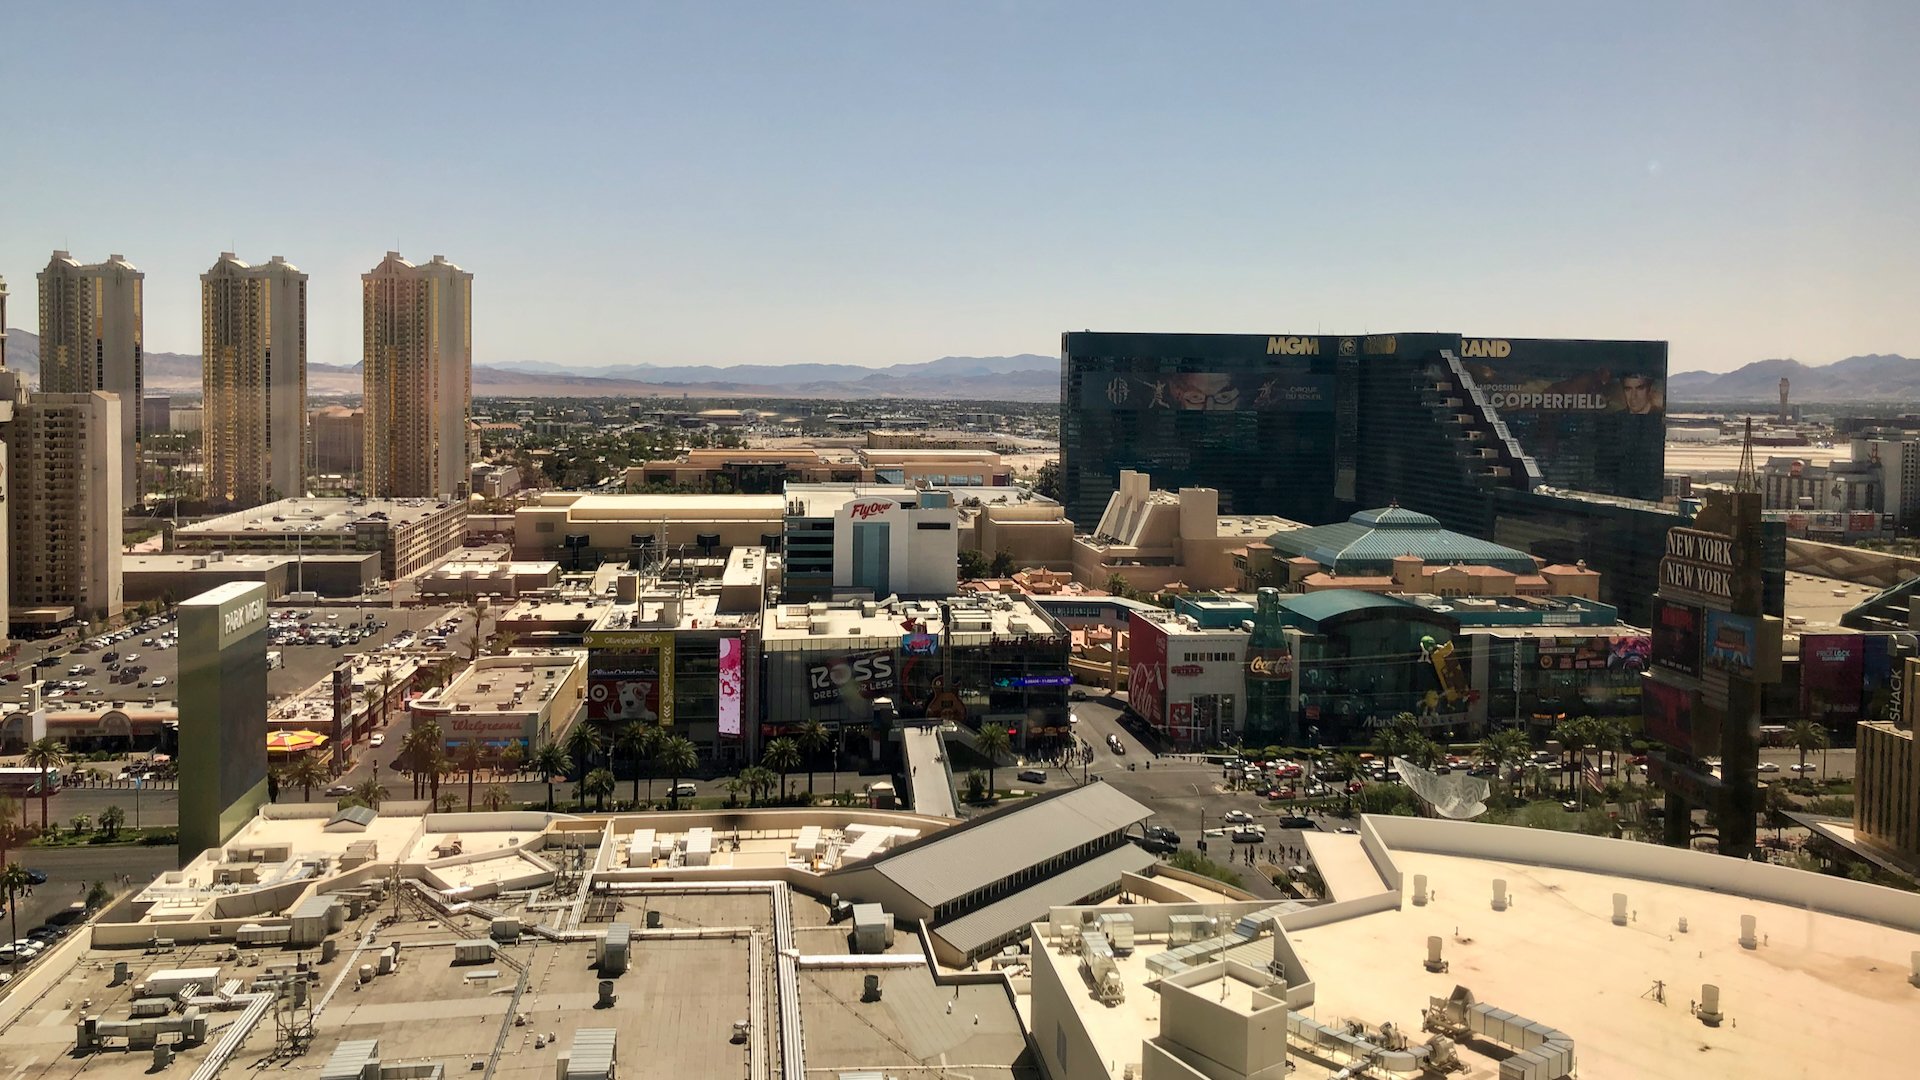  Our view of the Strip. 